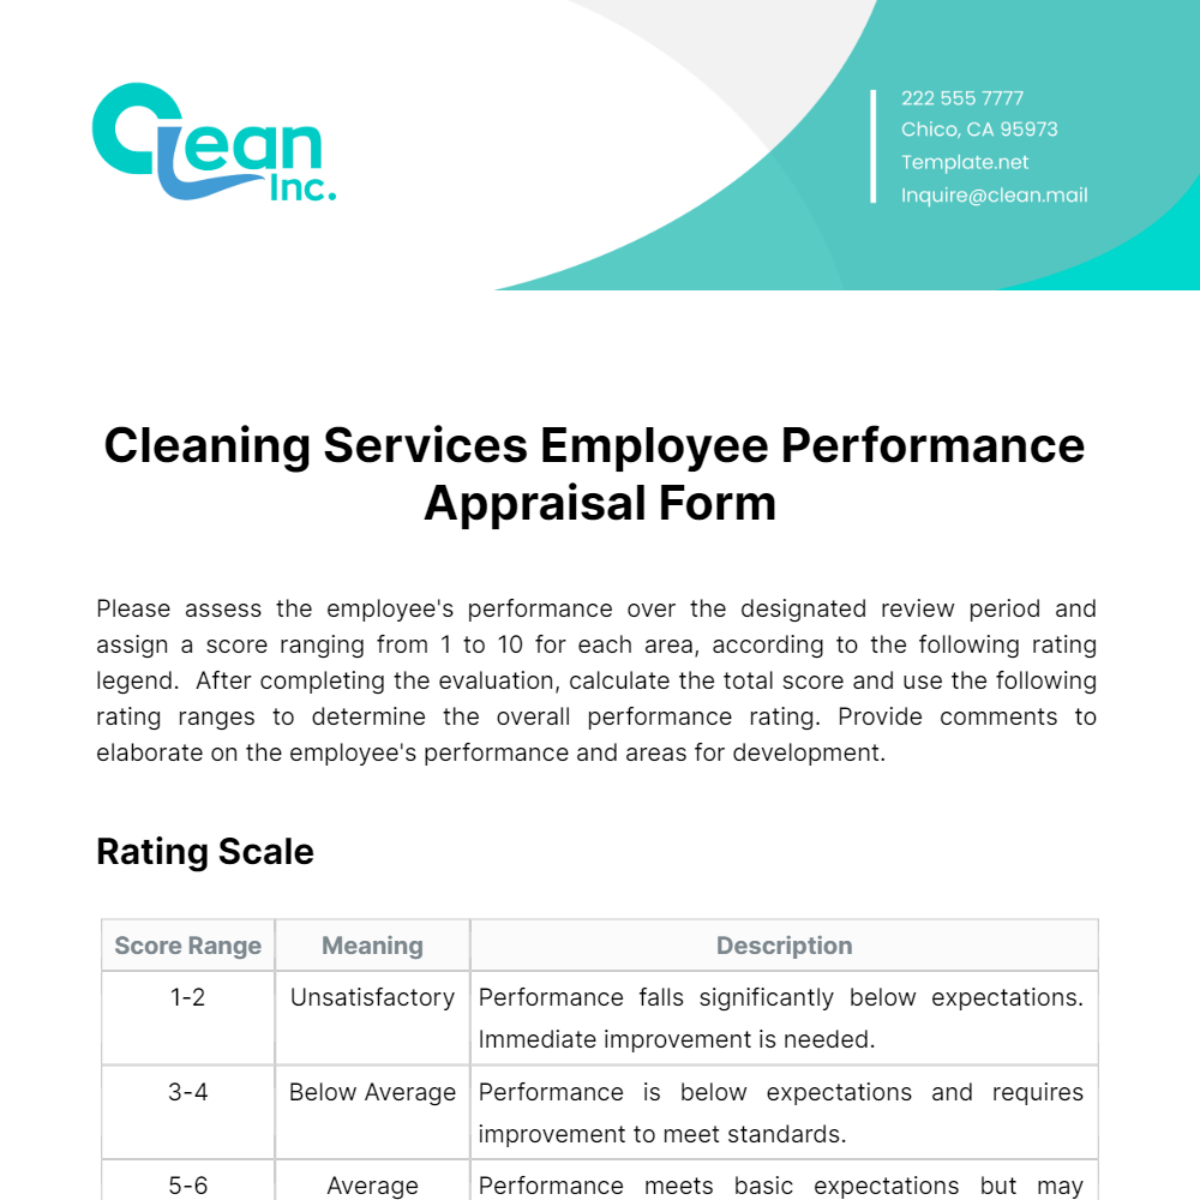 Free Cleaning Services Employee Performance Appraisal Form Template